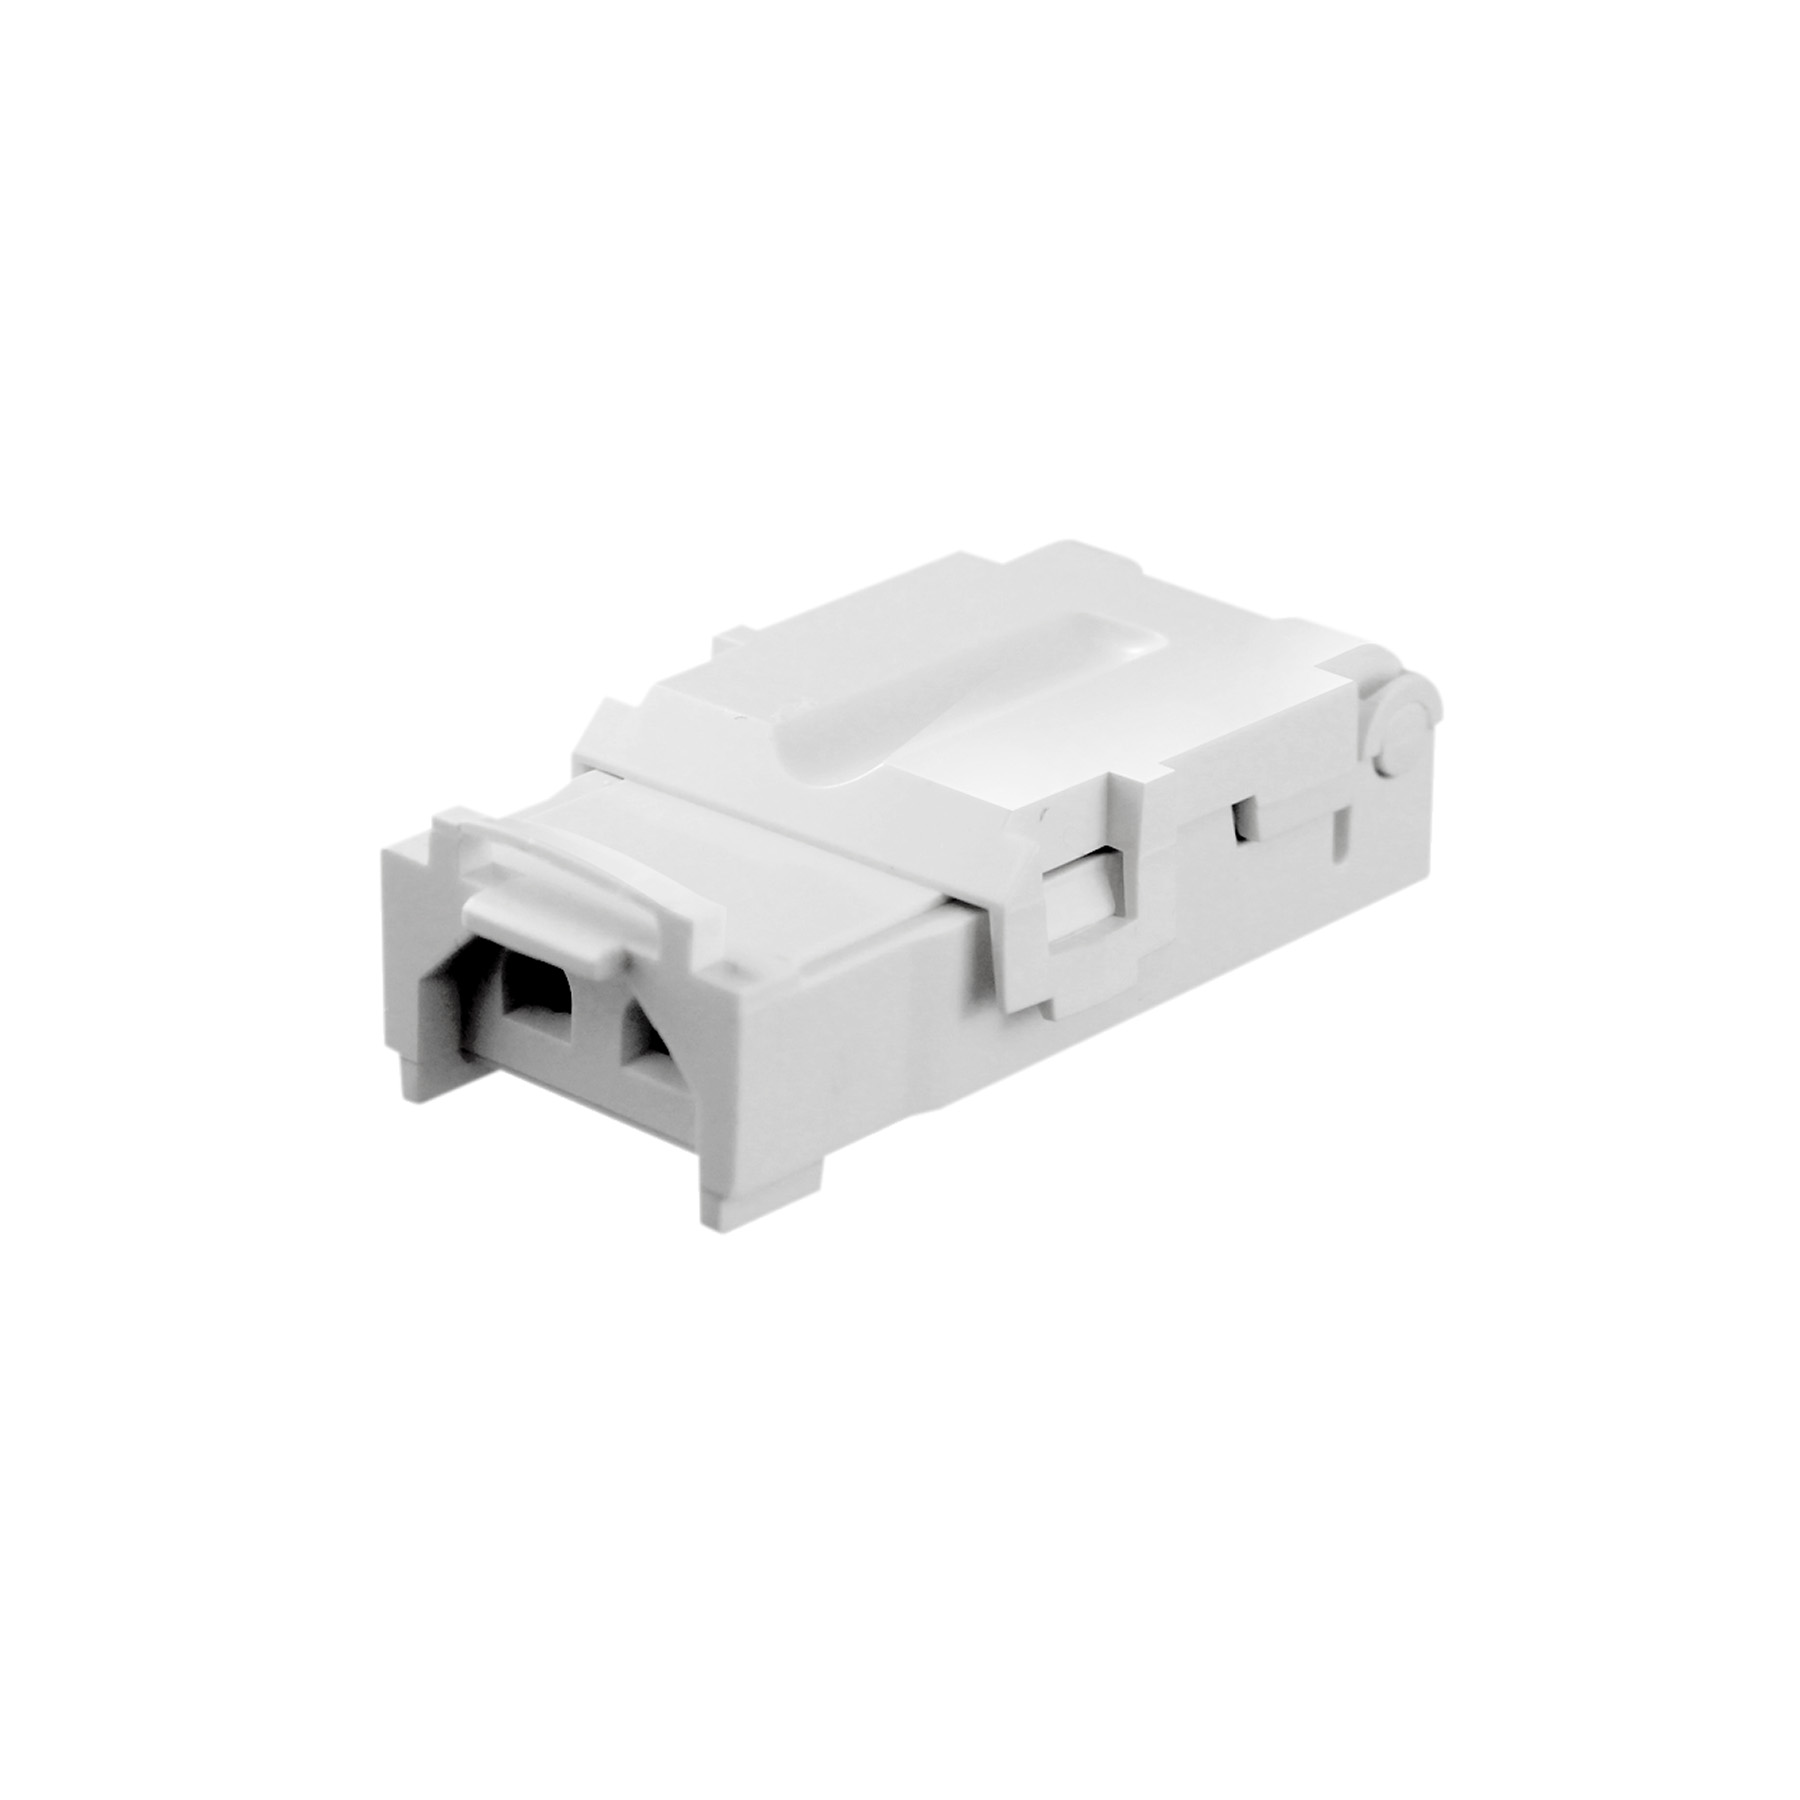 NuTone® E-Box Only for use w/ CI399 Electra-Valve II Inlets